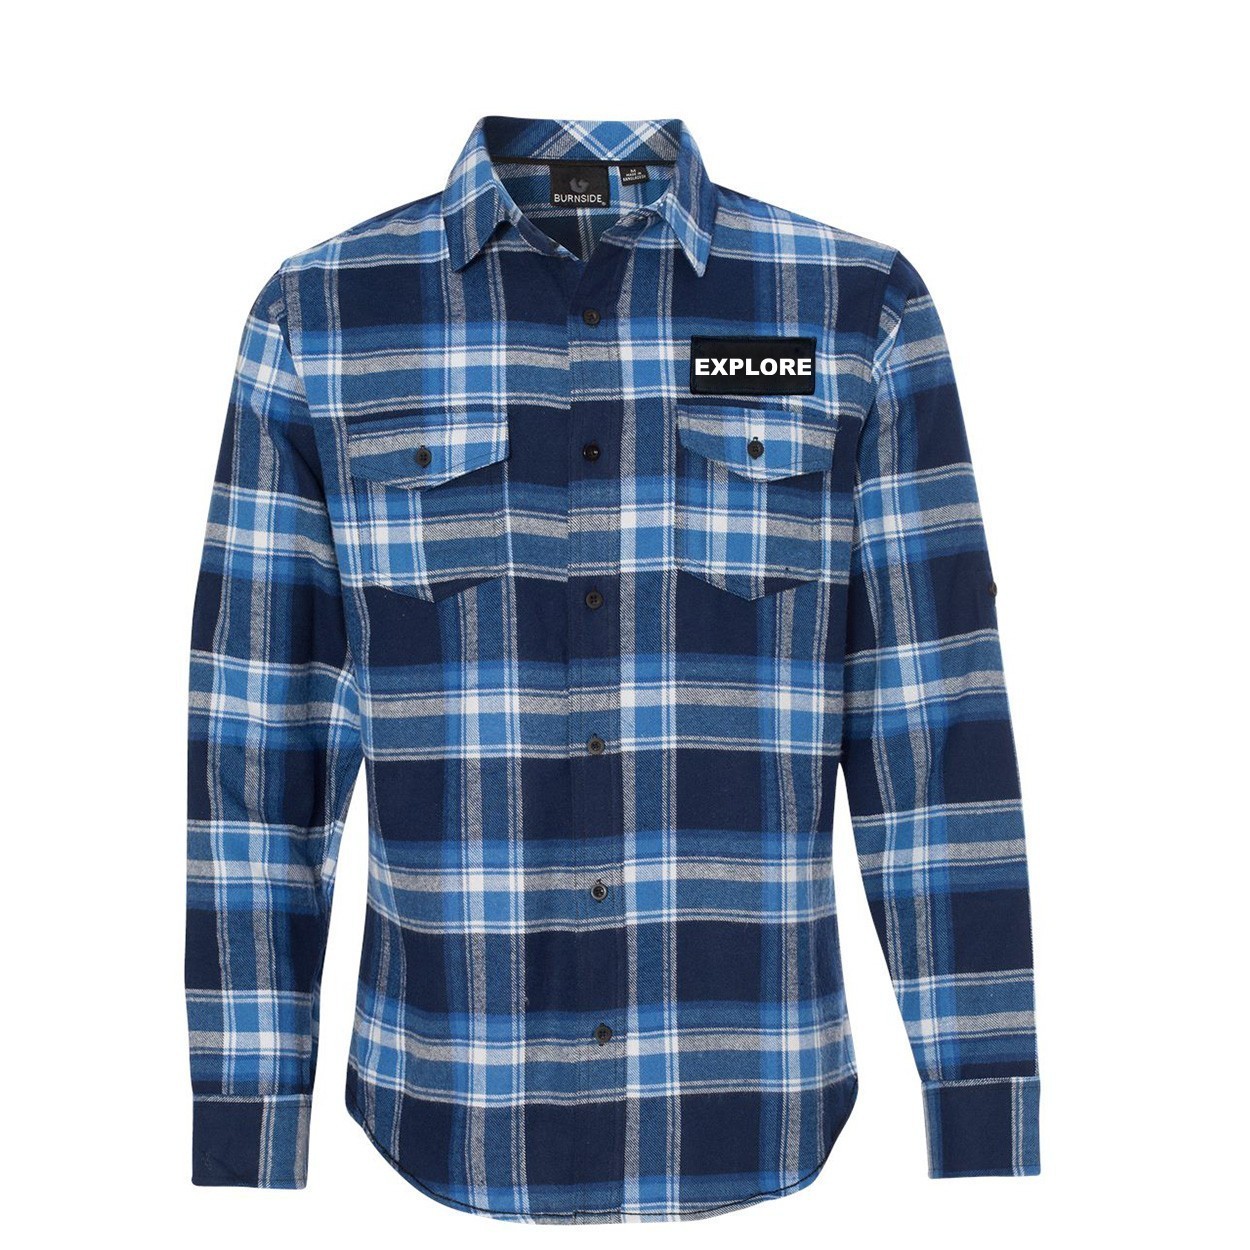 Explore Brand Logo Night Out Rectangle Woven Patch Flannel Shirt Long Sleeve Blue/White (White Logo)